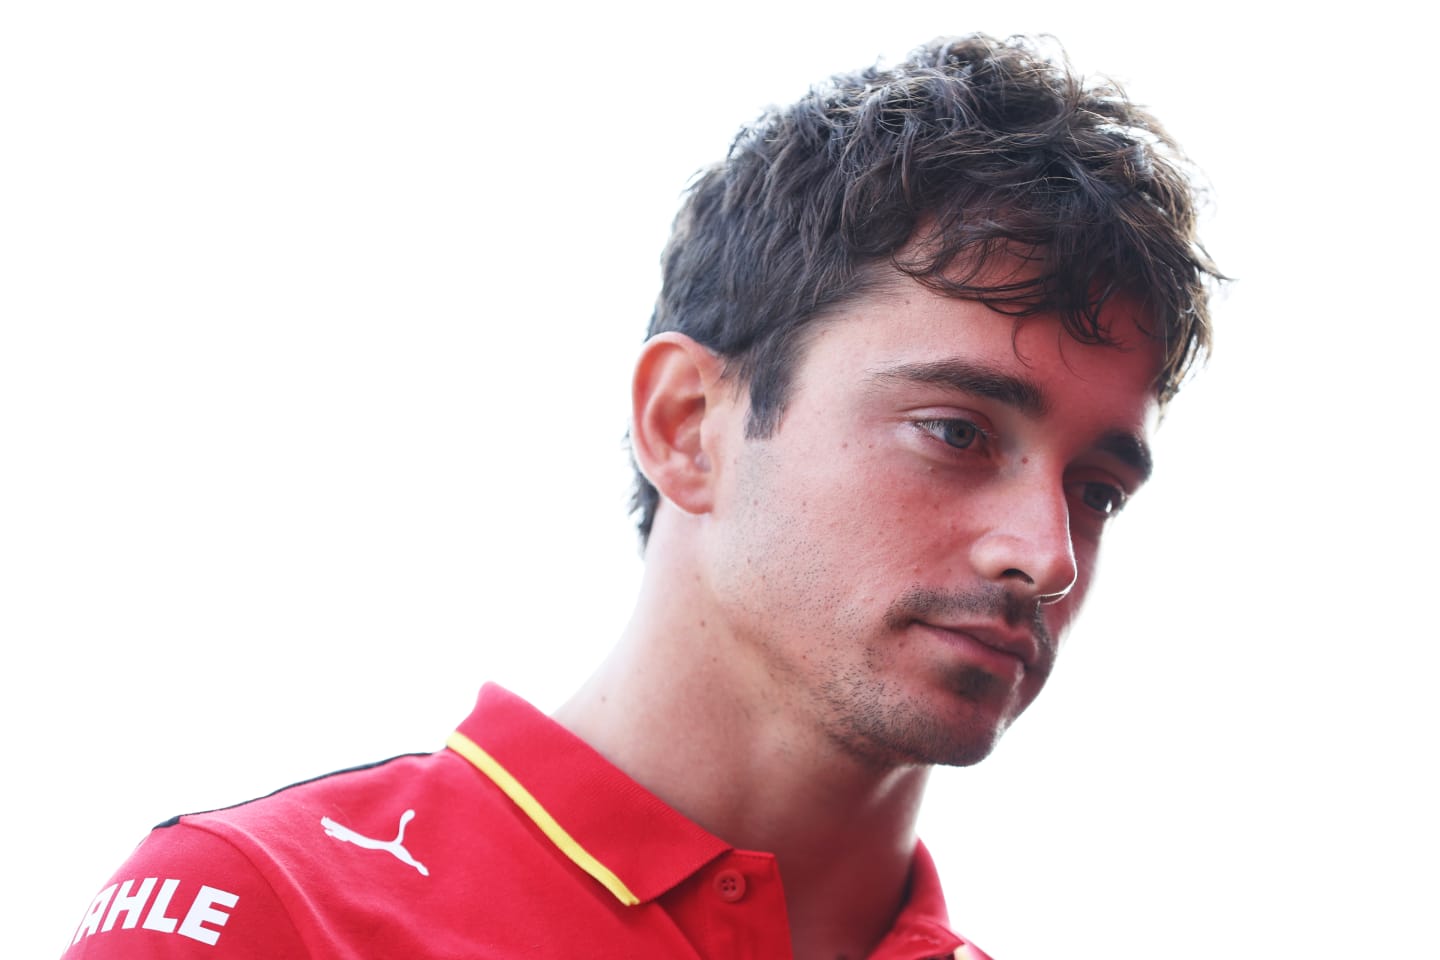 MONZA, ITALY - AUGUST 31: Charles Leclerc of Monaco and Ferrari looks on in the Paddock during